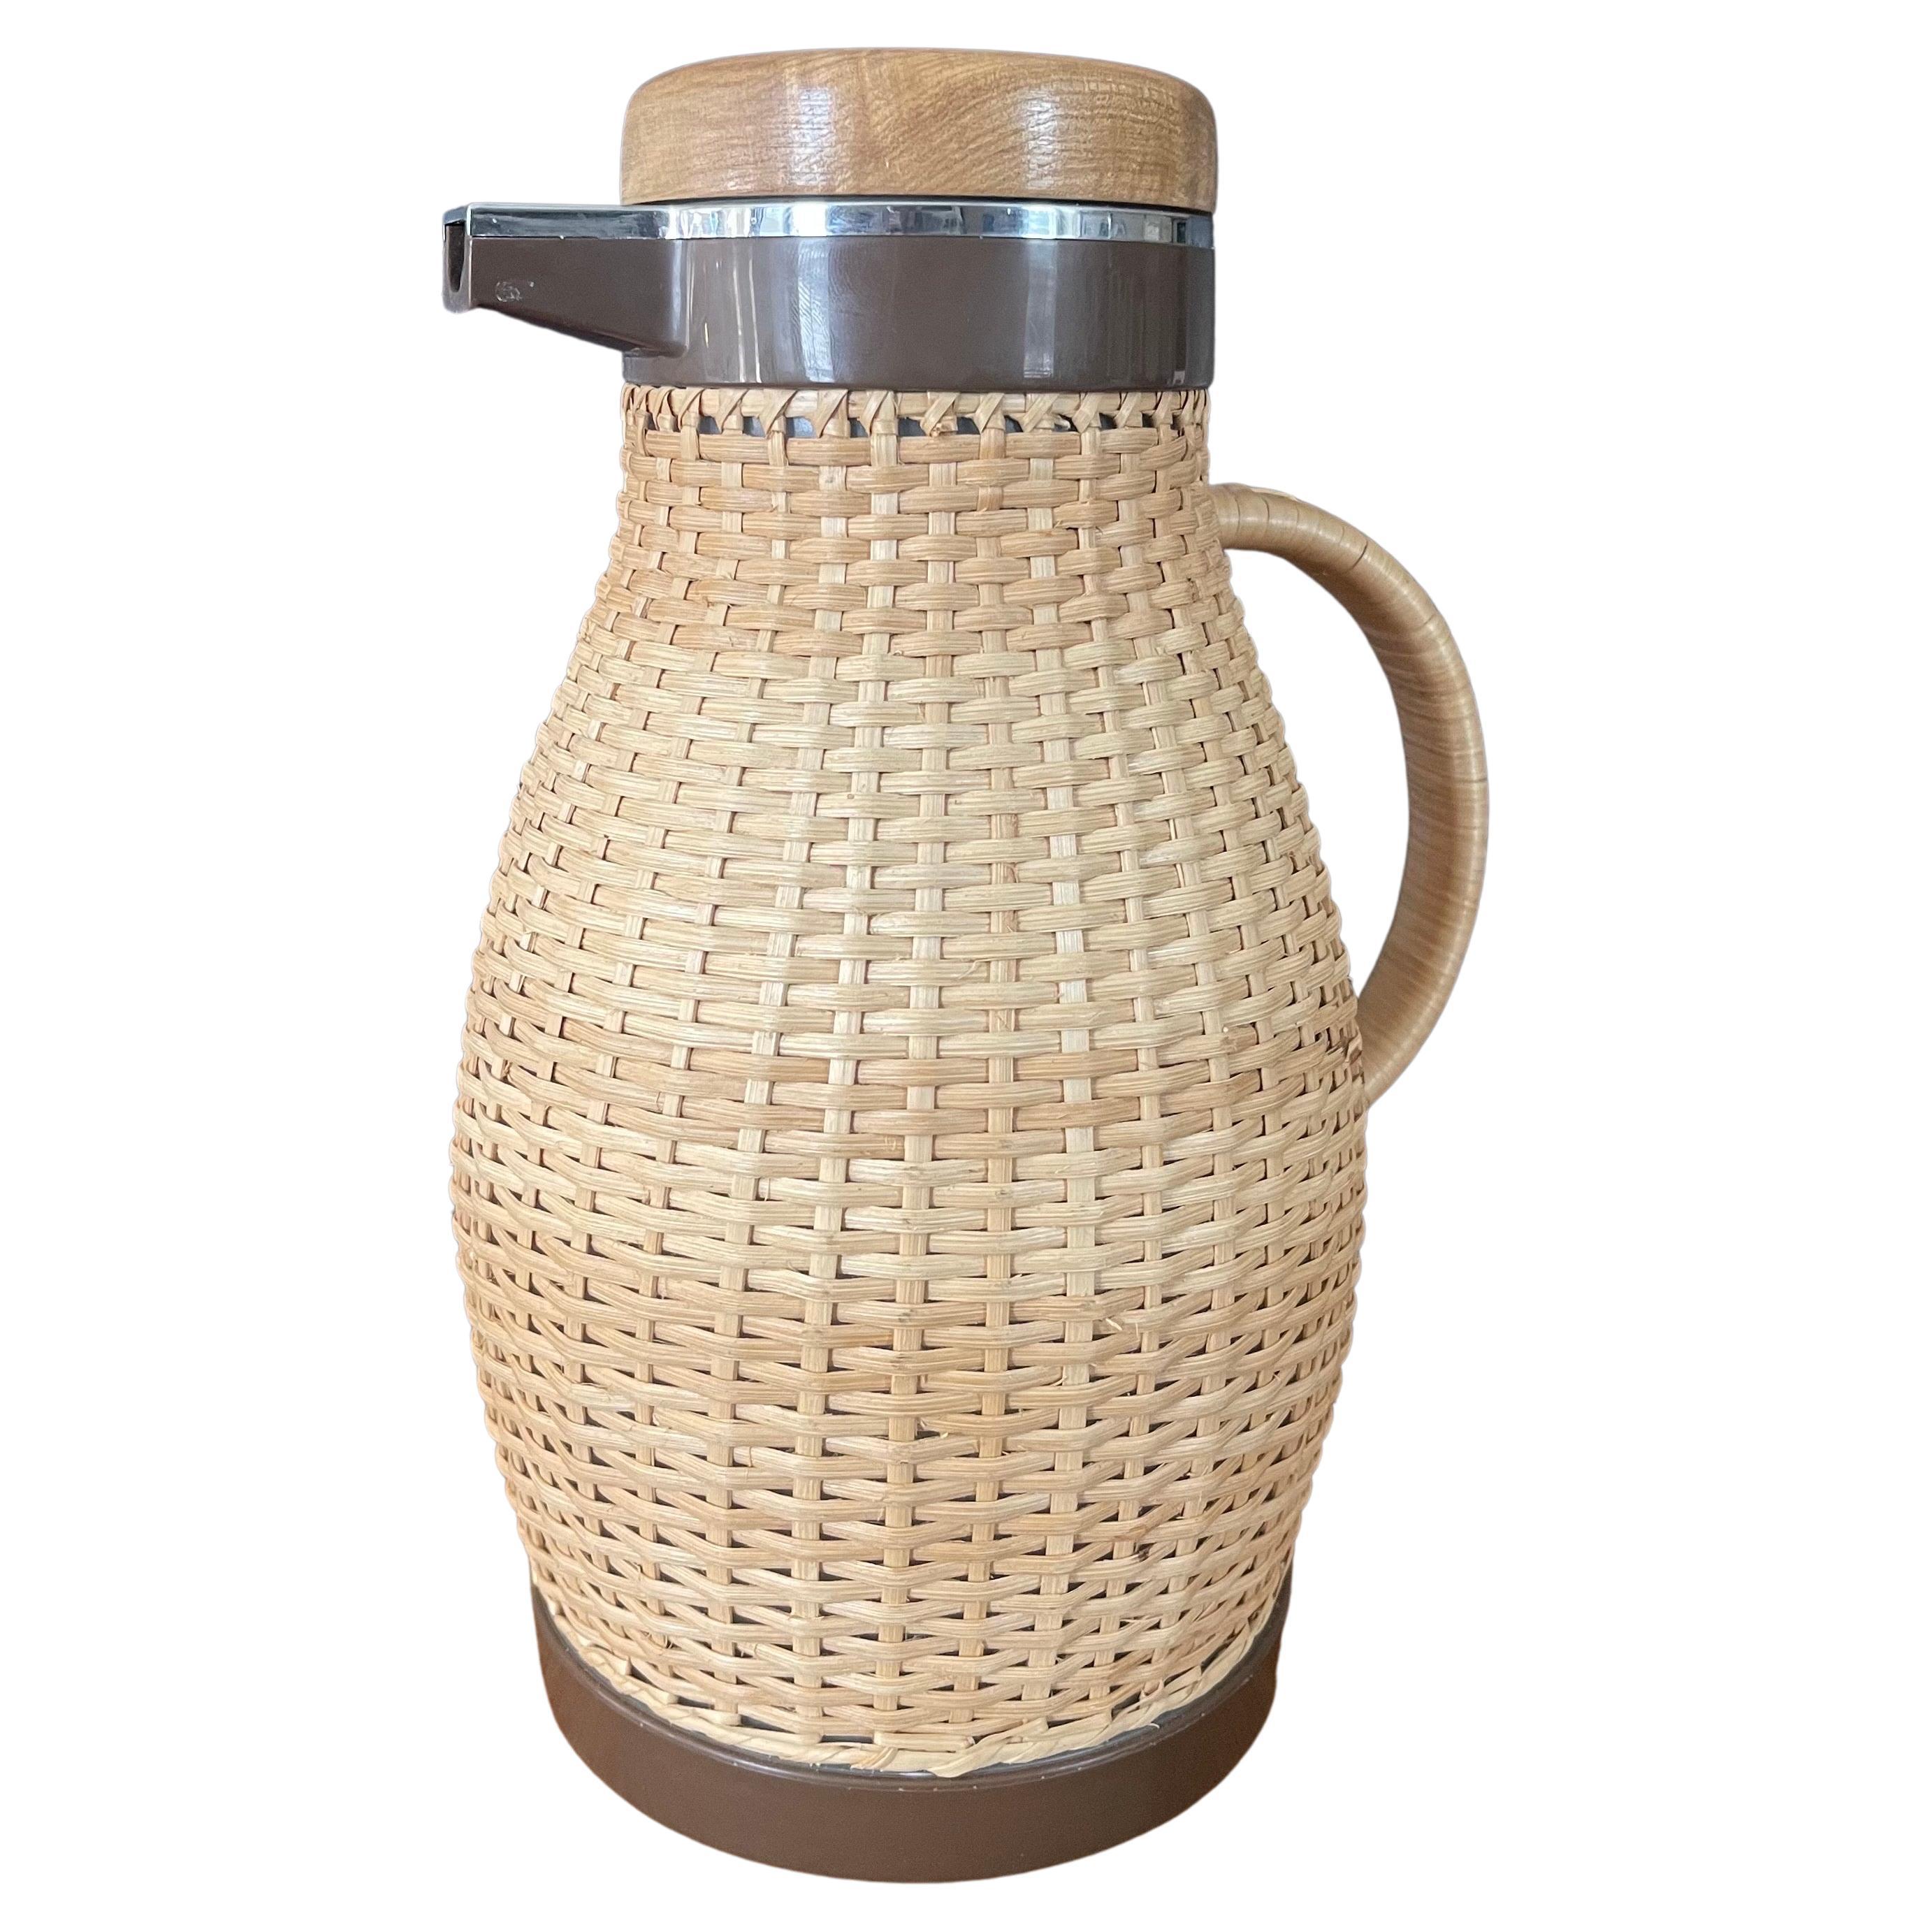 MCM Wicker Wrapped Thermos Coffee Carafe / Pitcher by Corning Designs